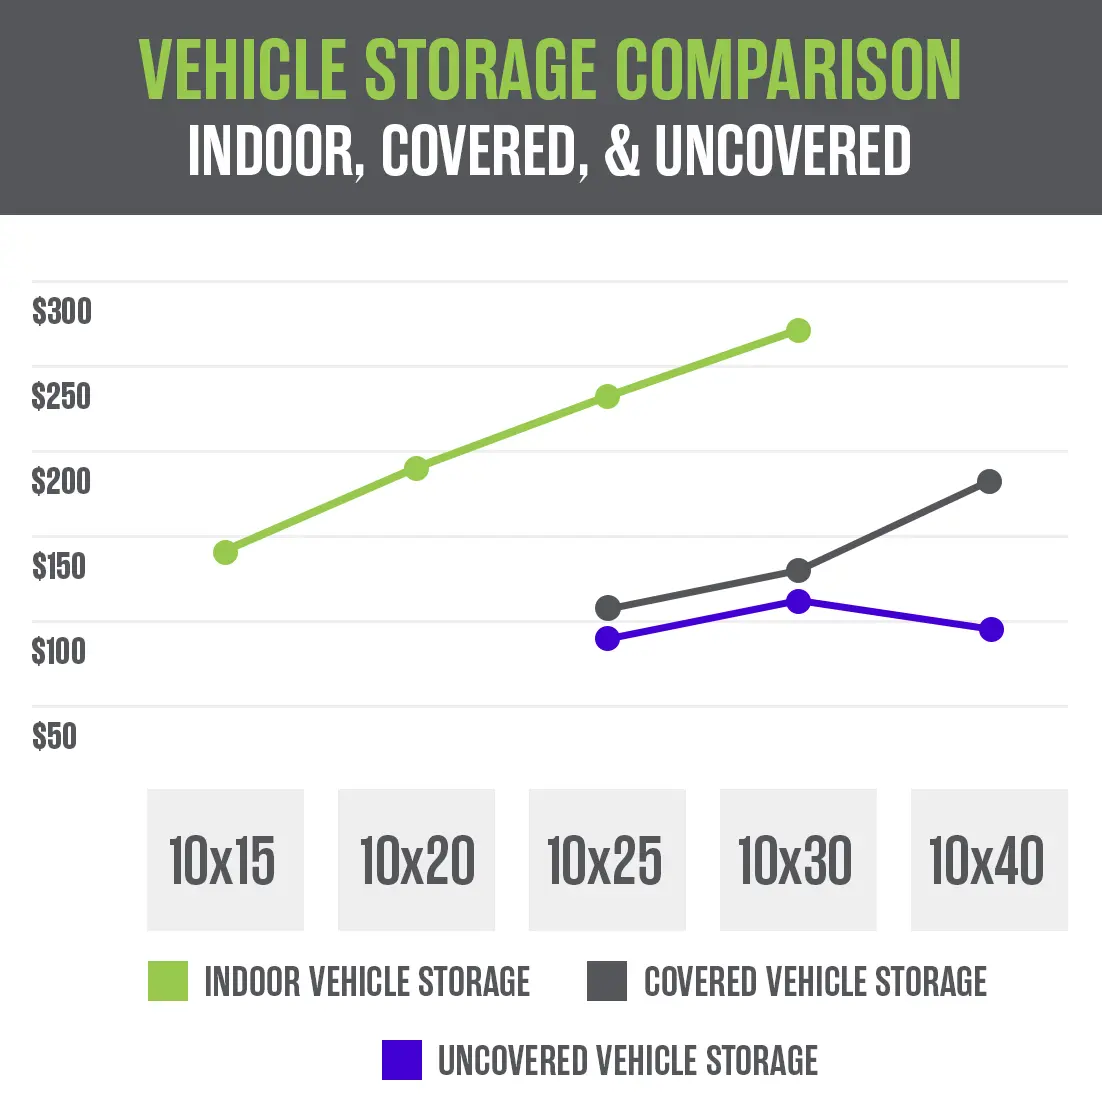 Line graph of indoor vehicle storage, covered vehicle storage, and uncovered vehicle storage costs based on unit size